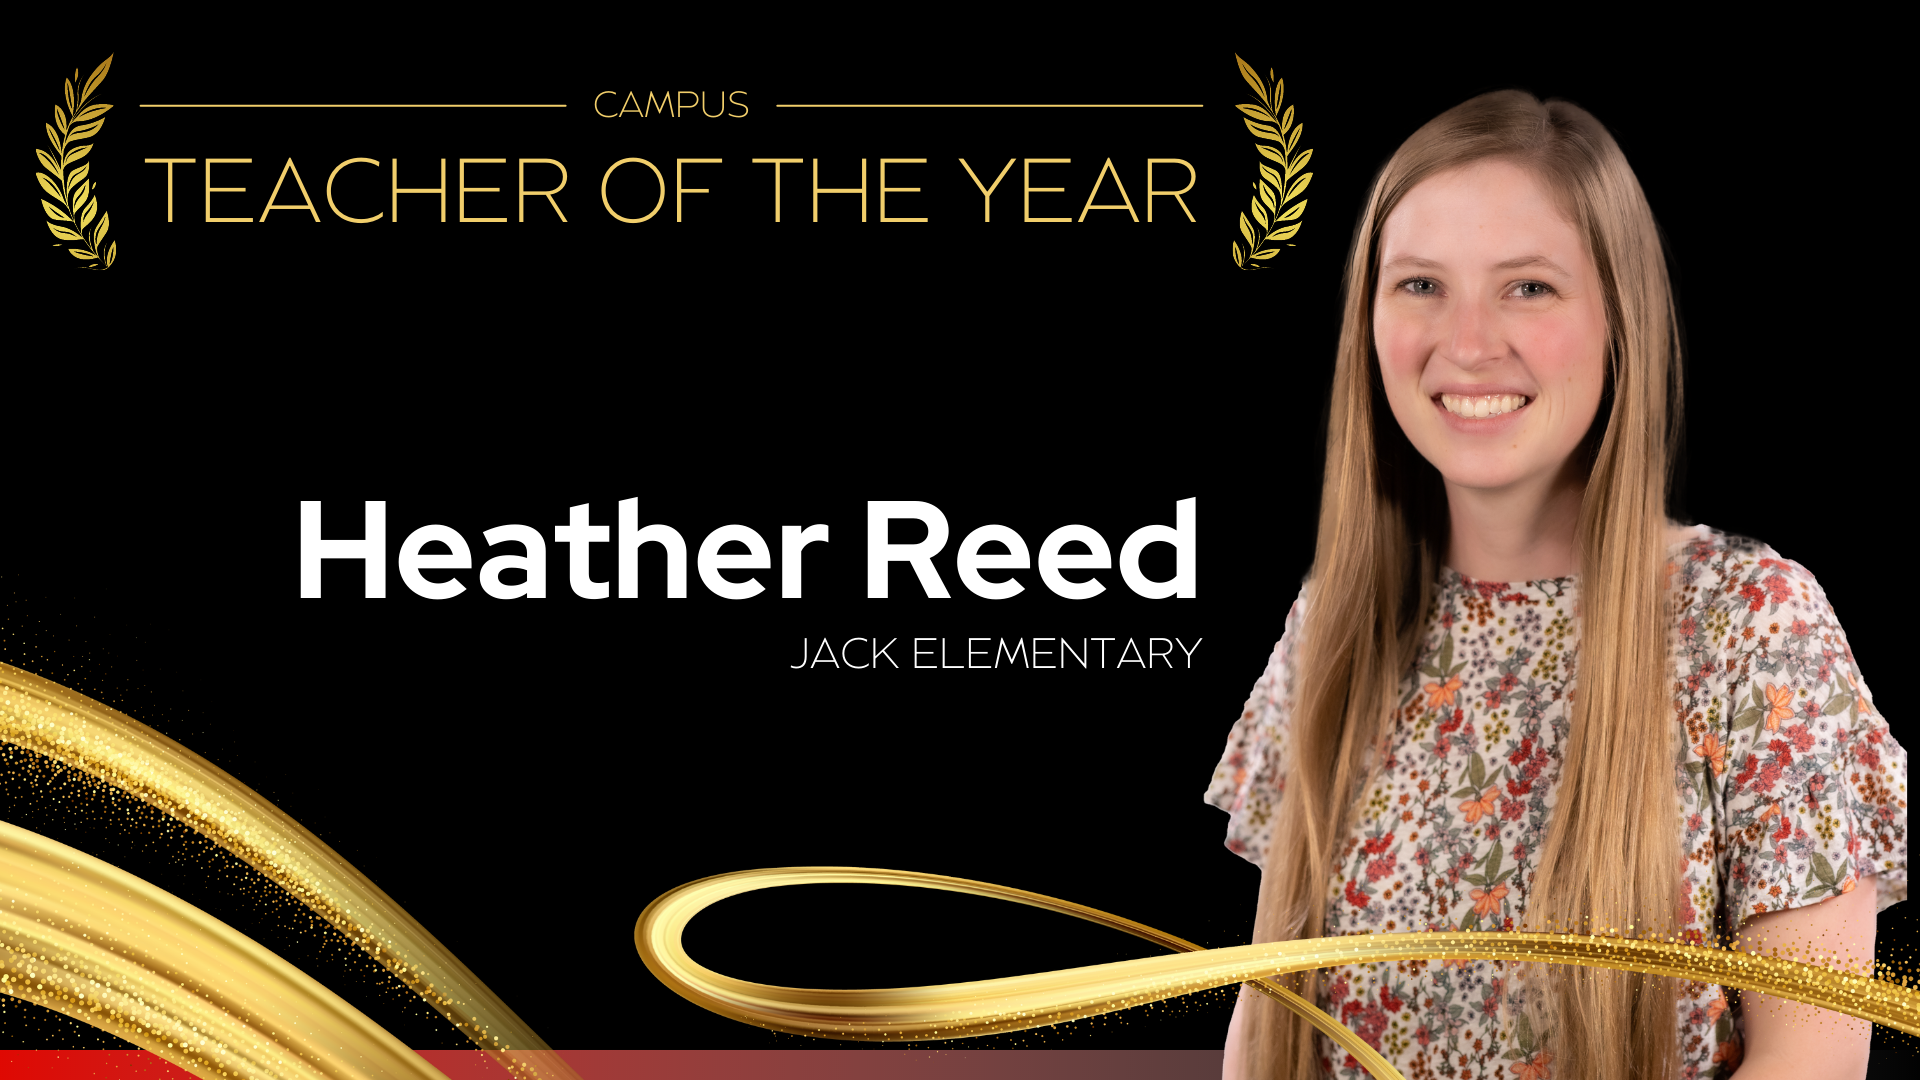 Campus Teacher of the year Dr. Bryan C. Jack Elementary School - Heather Reed